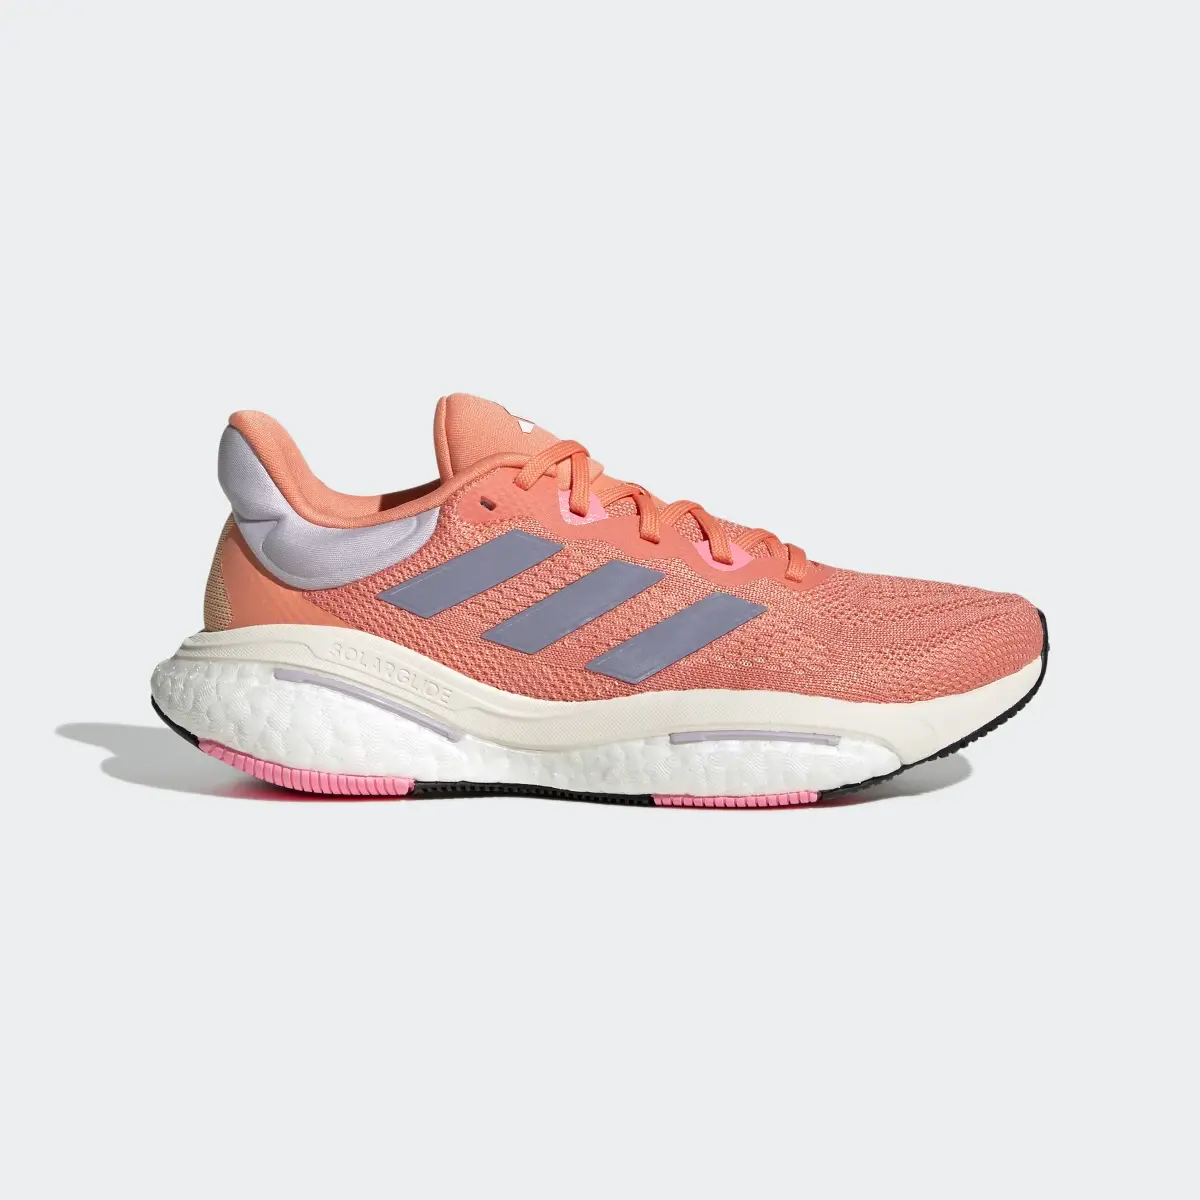 Adidas SOLARGLIDE 6 Running Shoes. 2